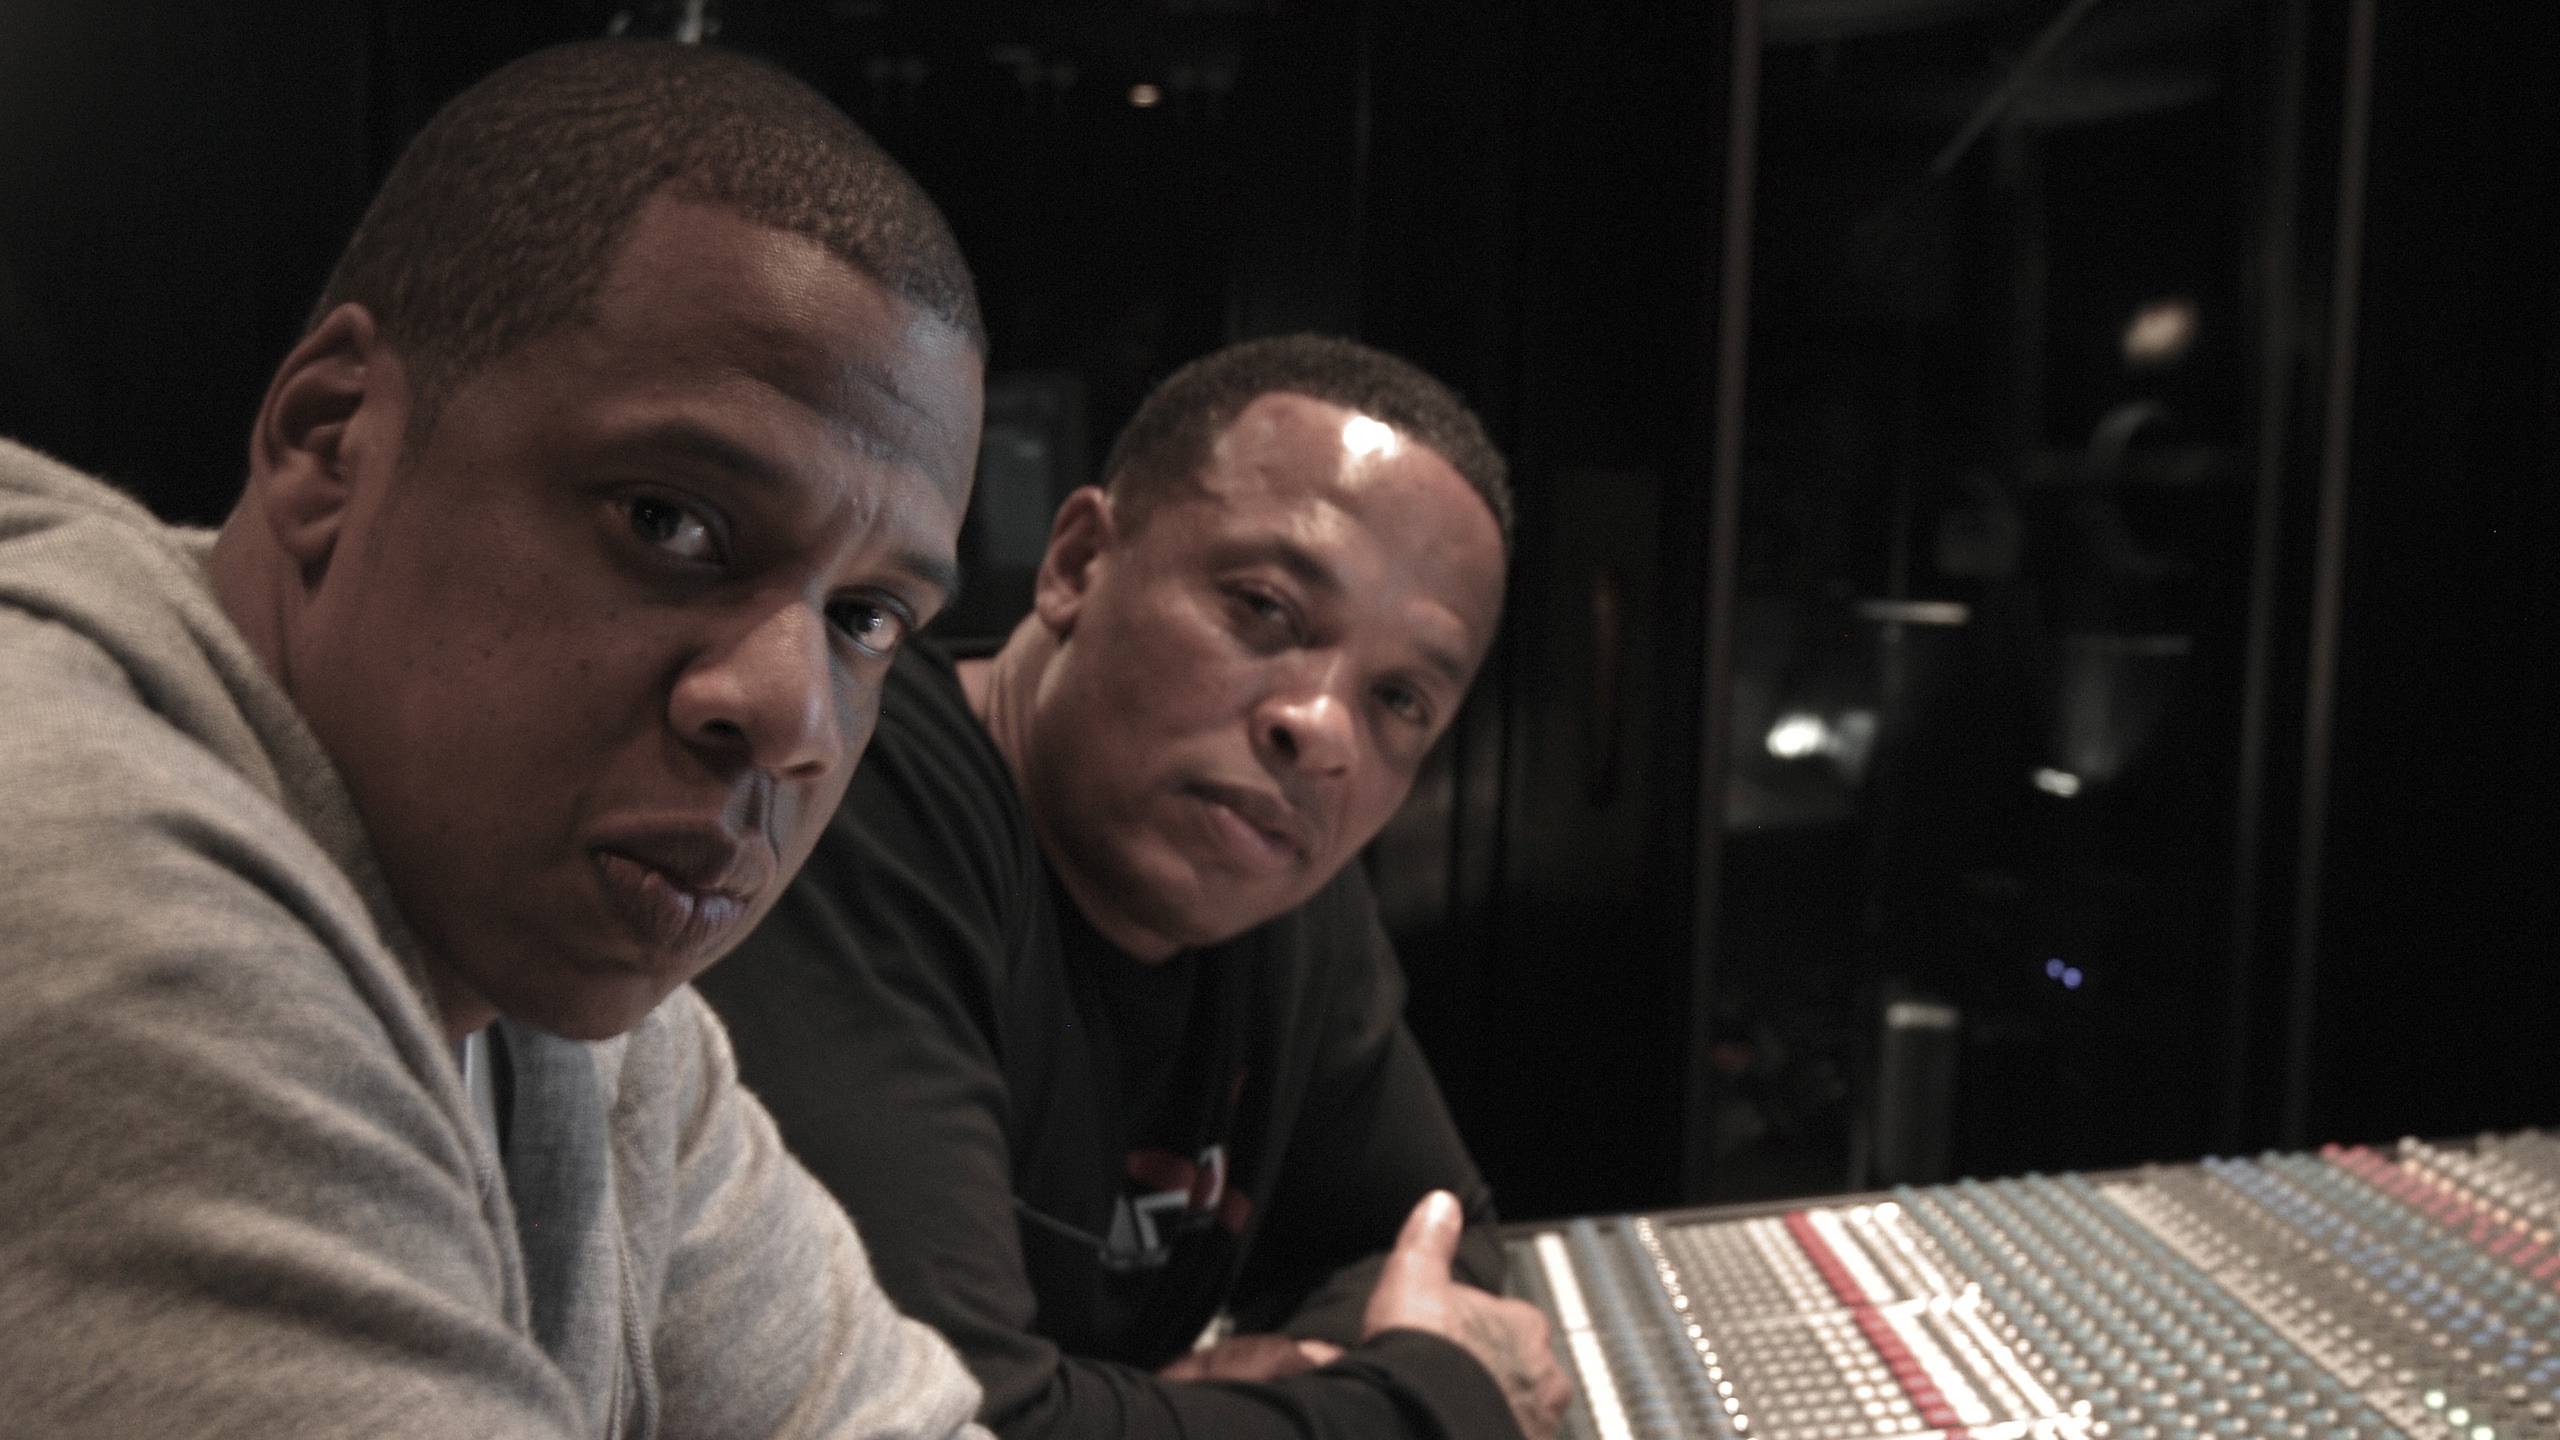 Jaz-Z and Dr Dre in Studio for 2560x1440 HDTV resolution